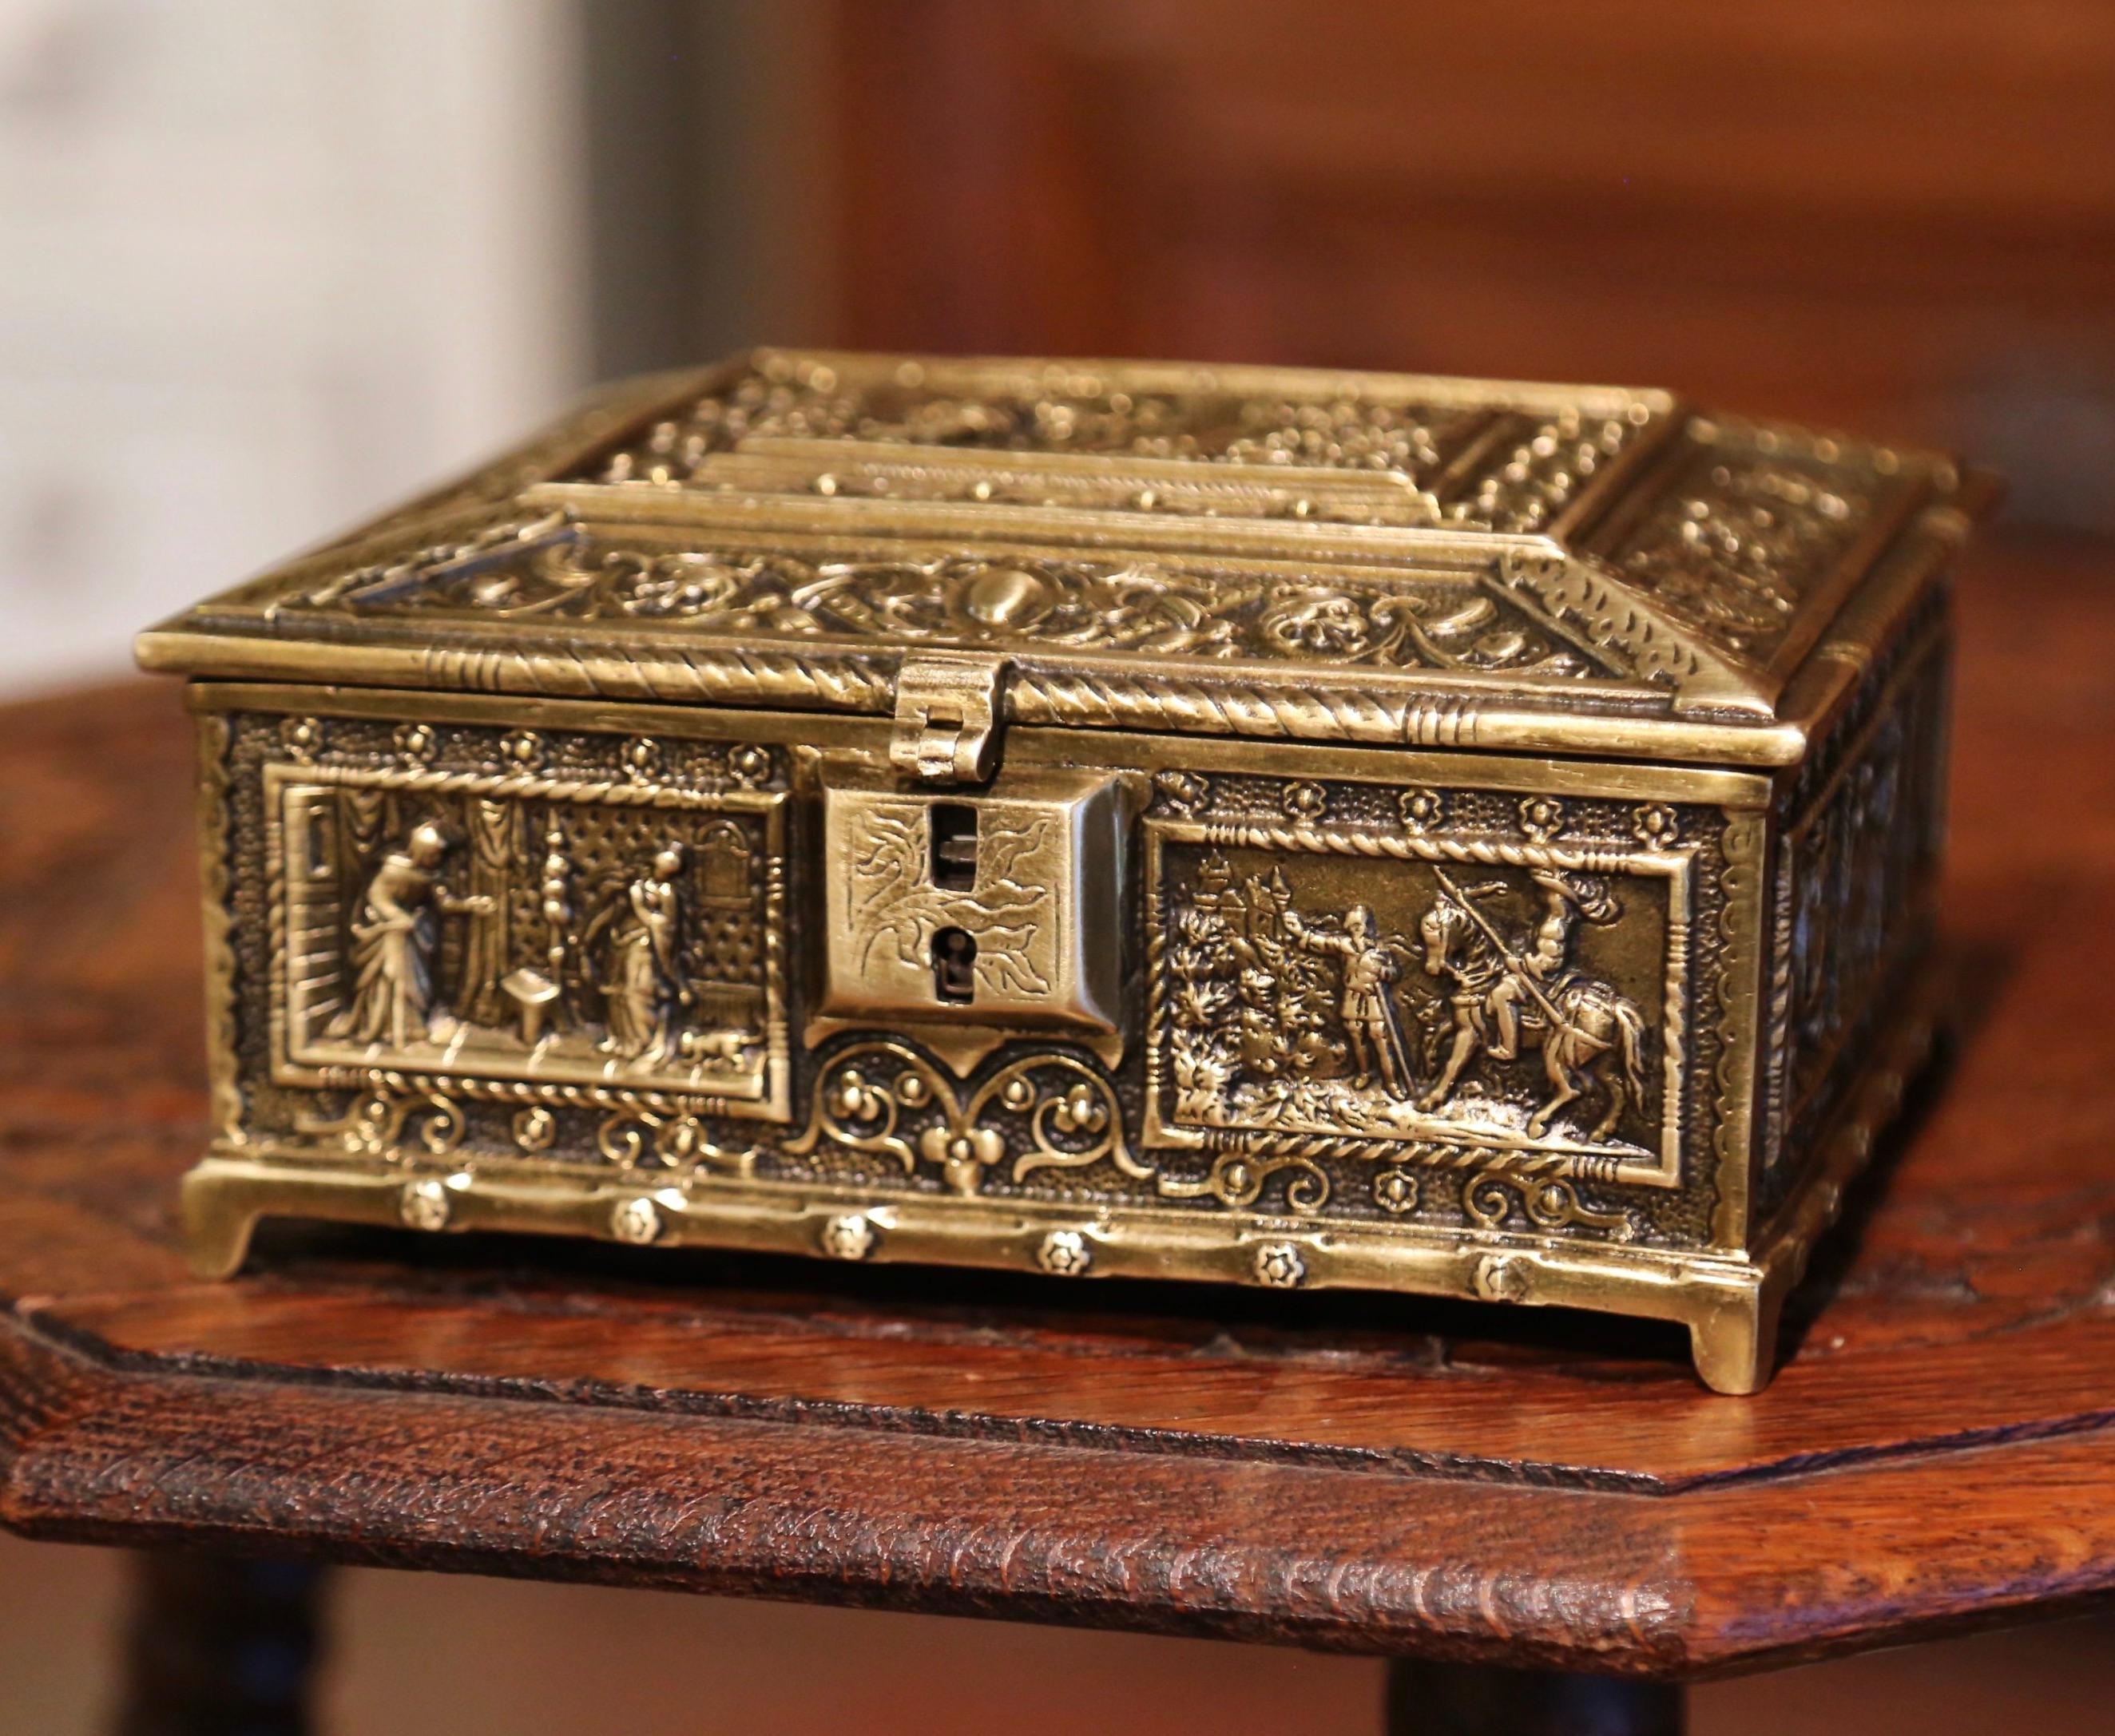 Hand-Crafted 19th-Century Belgian Patinated Bronze Jewelry Box with Medieval Court Decor